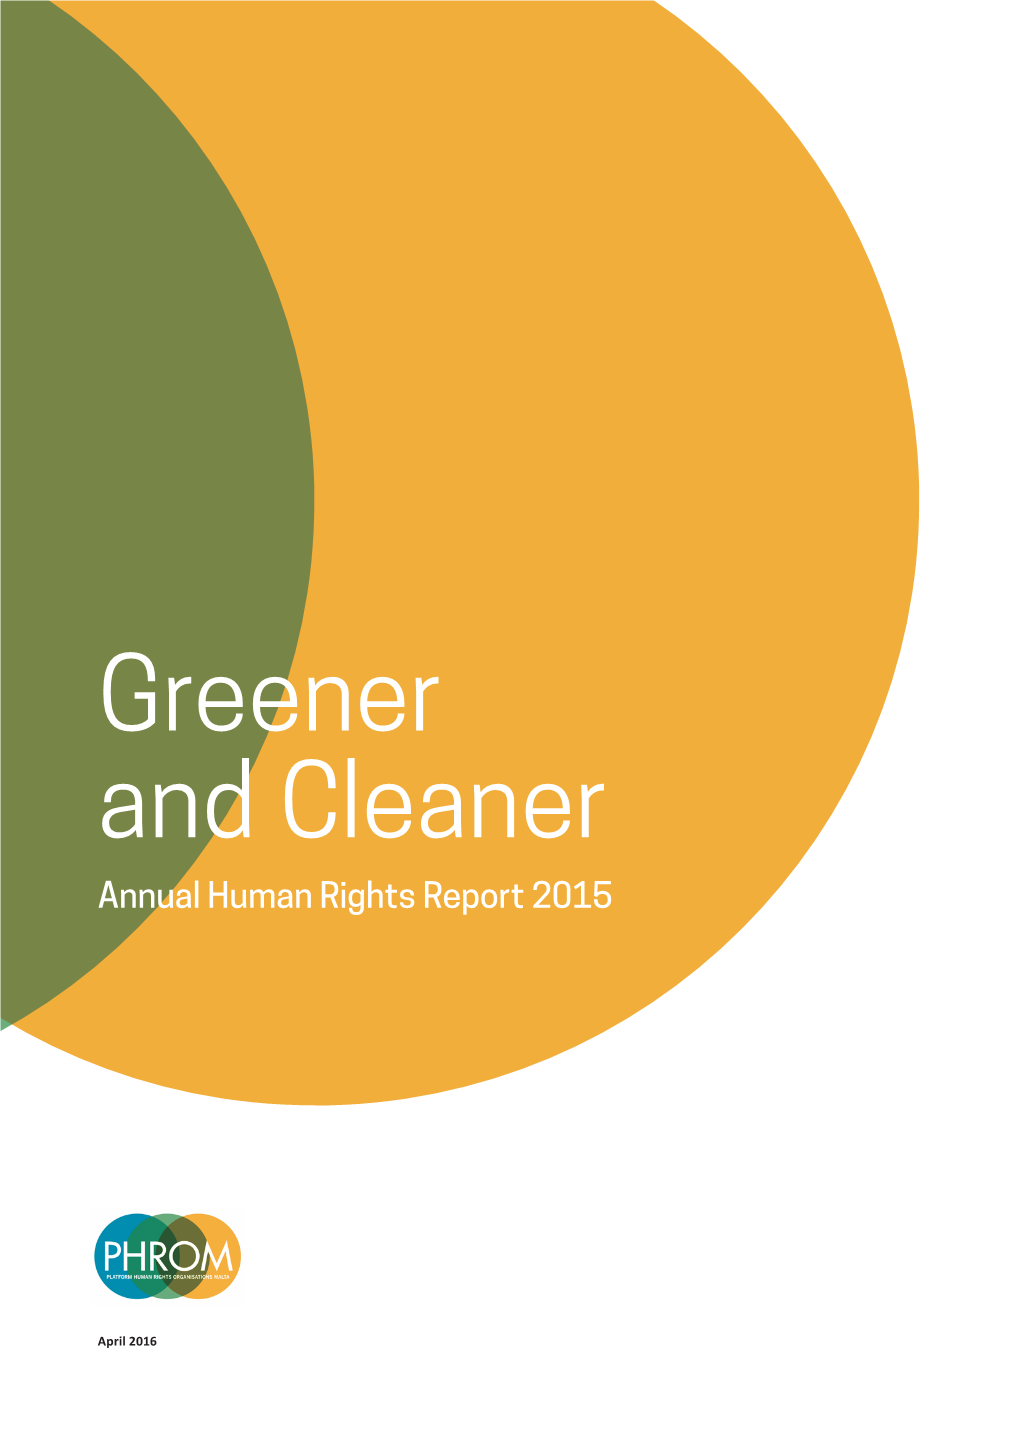 Greener and Cleaner Annual Human Rights Report 2015